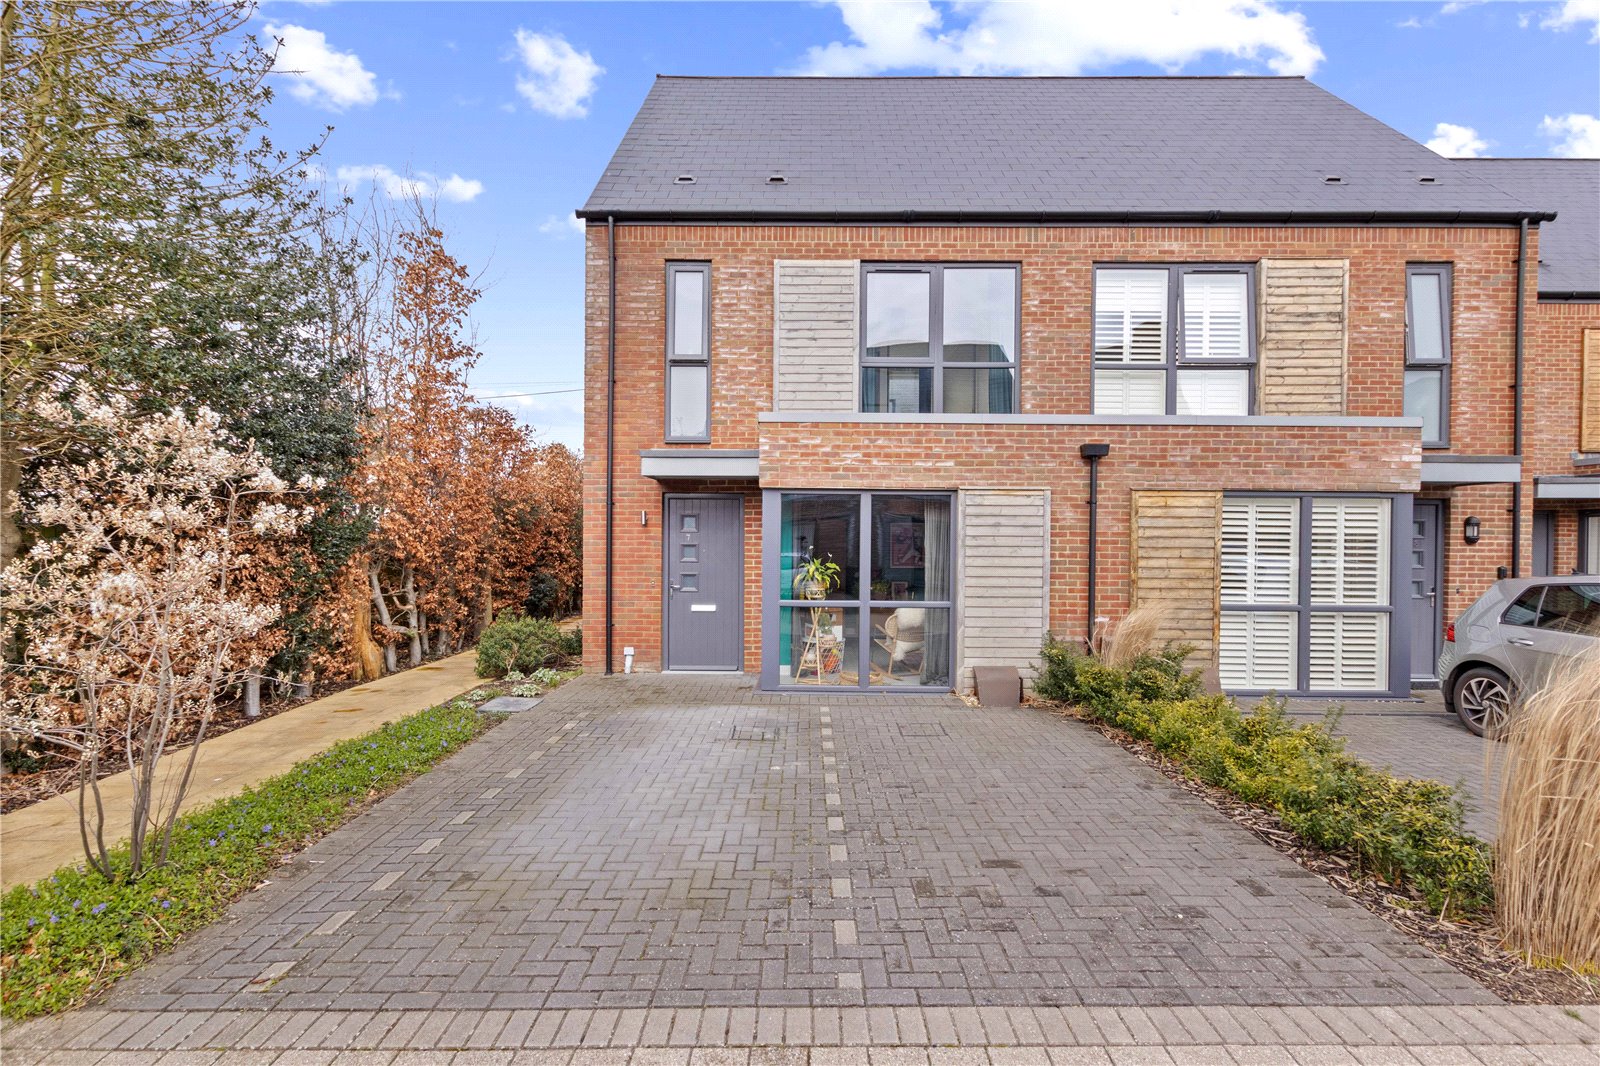 3 bed house for sale in Windmill Close, Chichester - Property Image 1